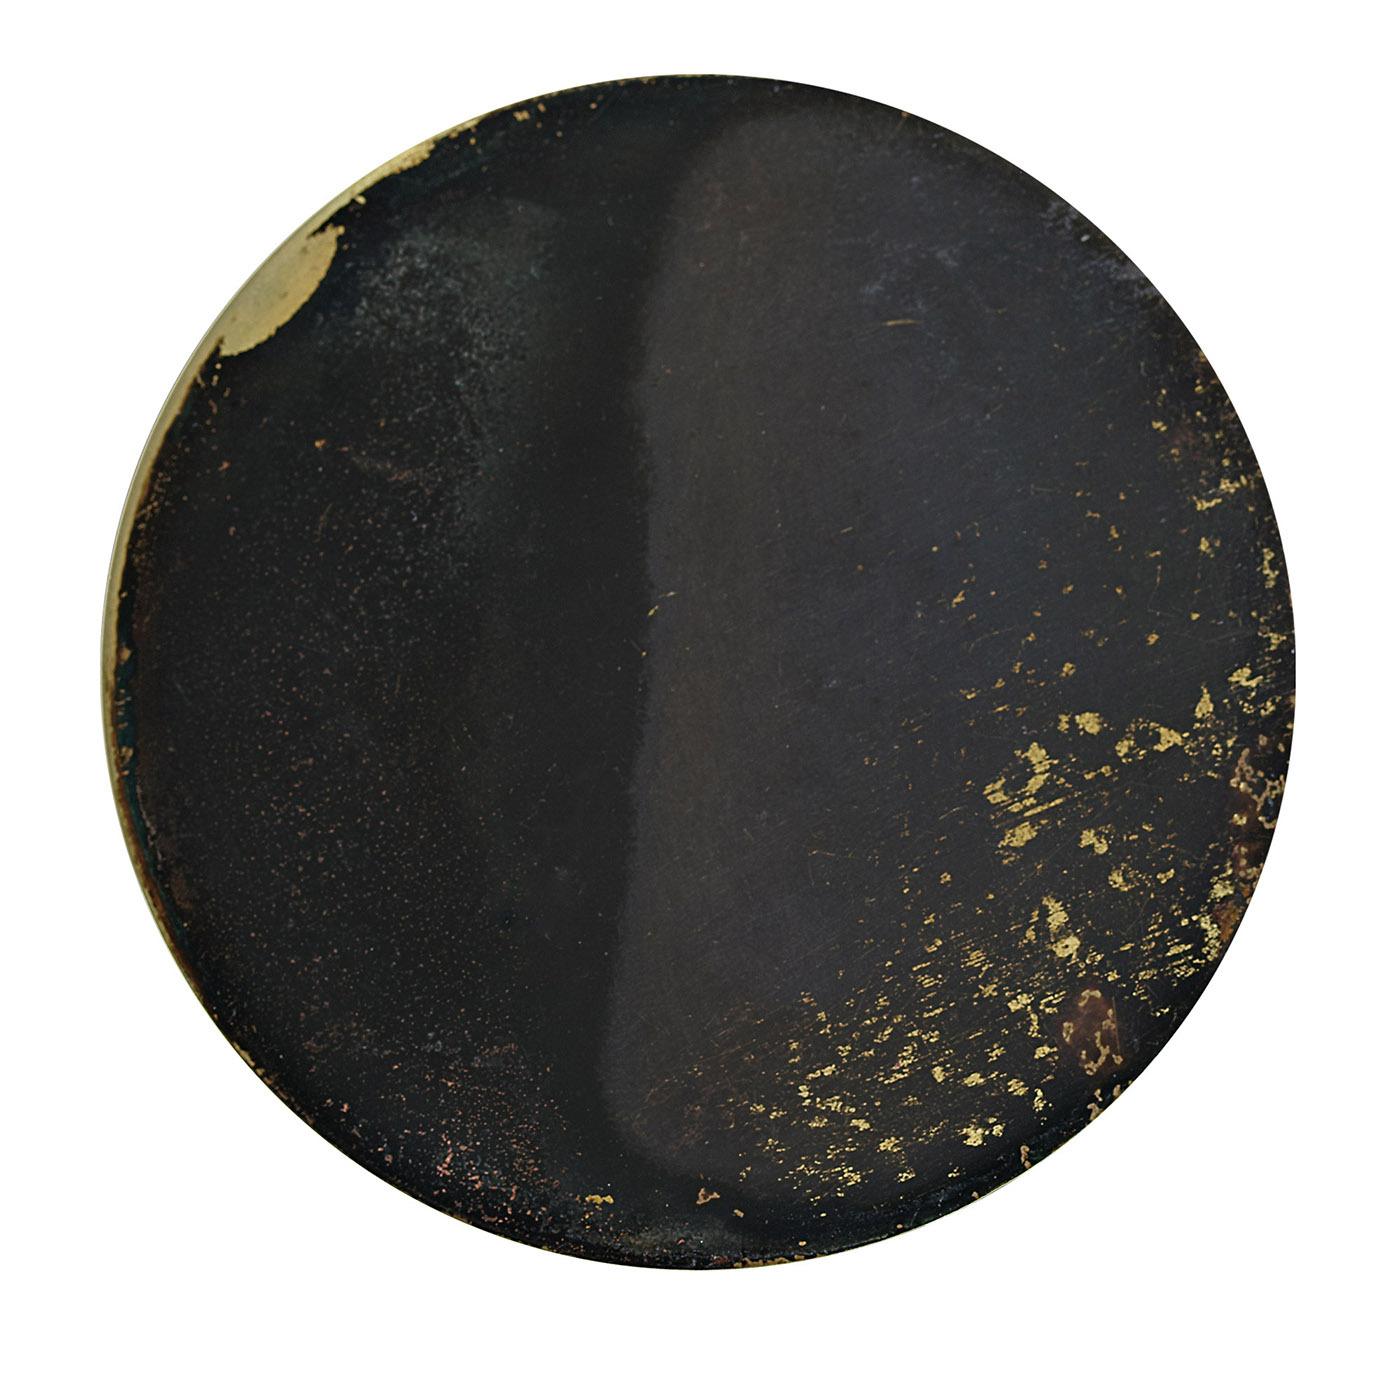 This one-of-a-kind set of six coasters belongs to the Geografie Emozionali Collection of metal designs employing acids and oxides to create unrepeatable traceries and gradients. Equipped with a velvety cover at the back for optimized grip, each